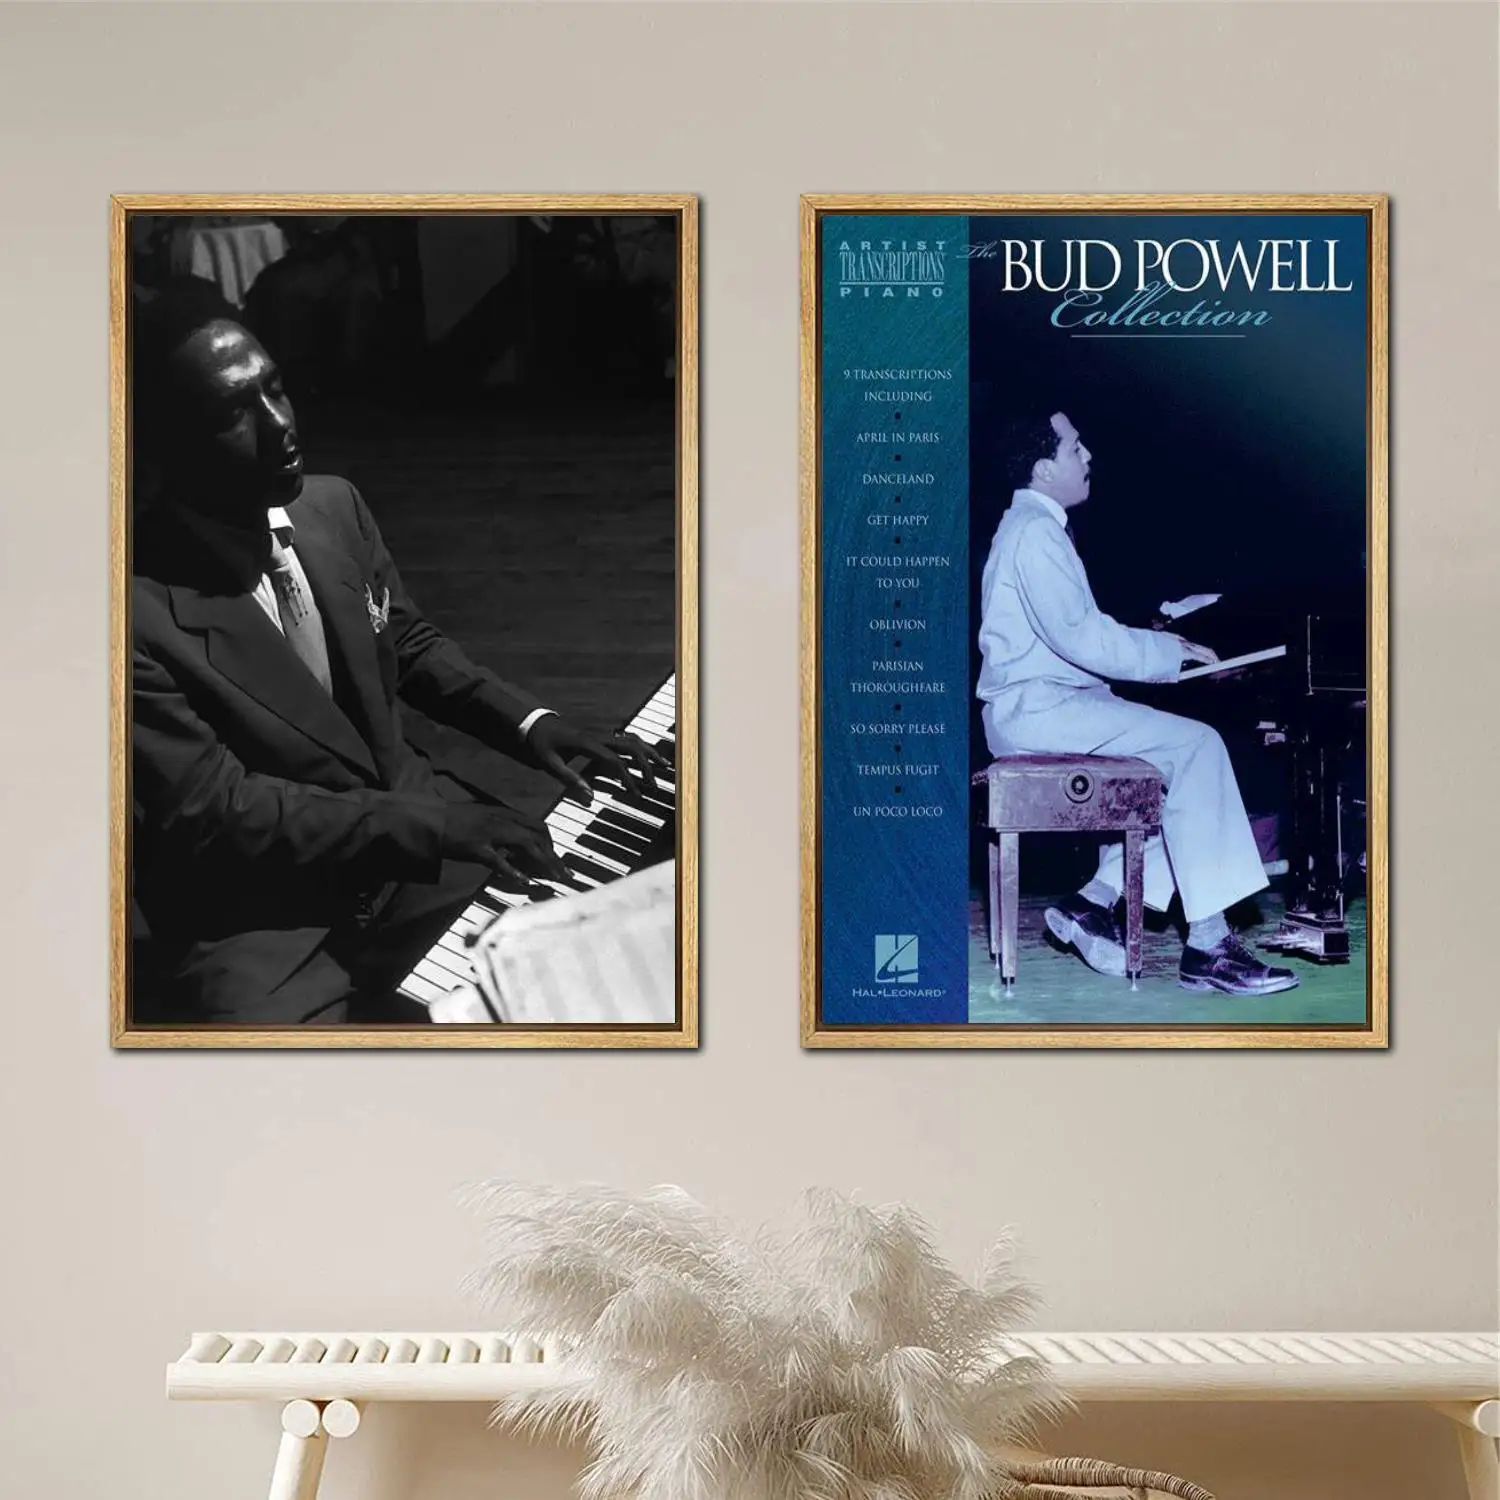 Bud Powell Poster Painting 24x36 Wall Art Canvas Posters room decor Modern Family bedroom Decoration Art wall decor